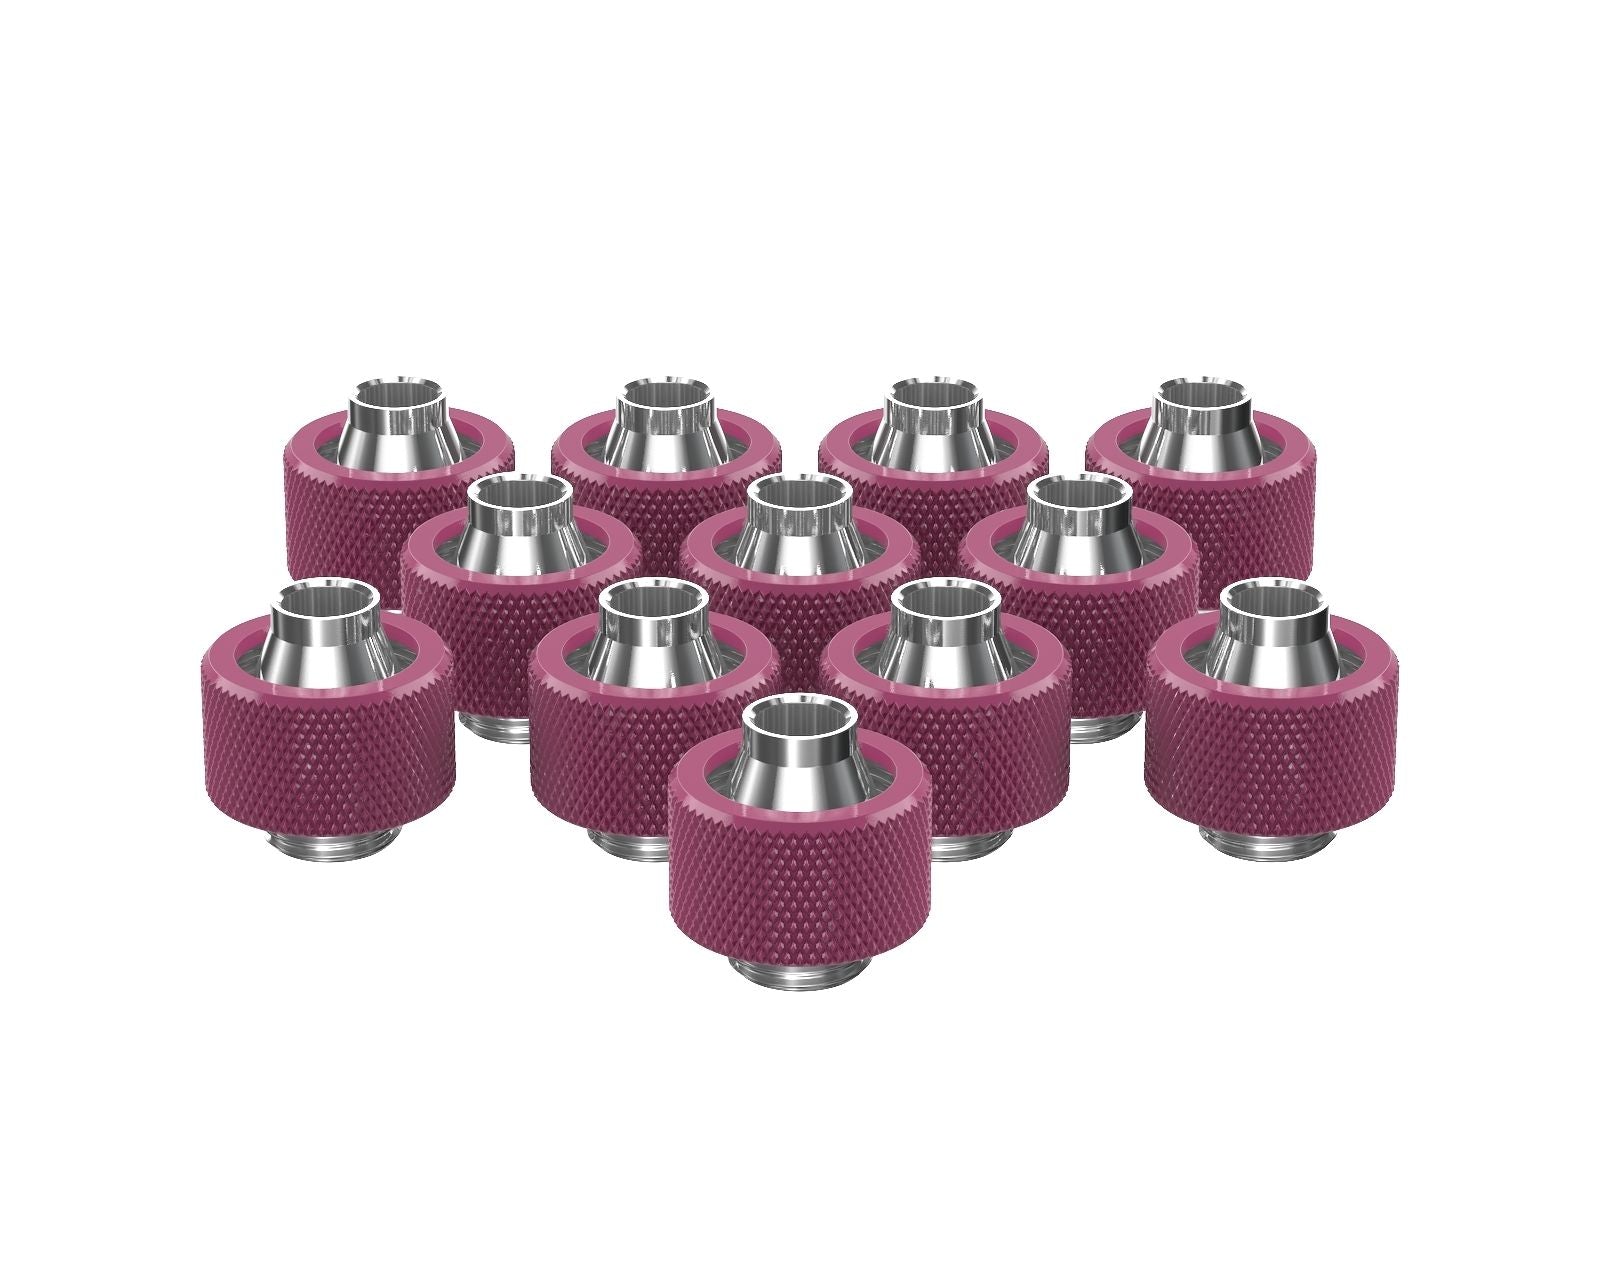 PrimoChill SecureFit SX - Premium Compression Fitting For 3/8in ID x 5/8in OD Flexible Tubing 12 Pack (F-SFSX58-12) - Available in 20+ Colors, Custom Watercooling Loop Ready - Magenta